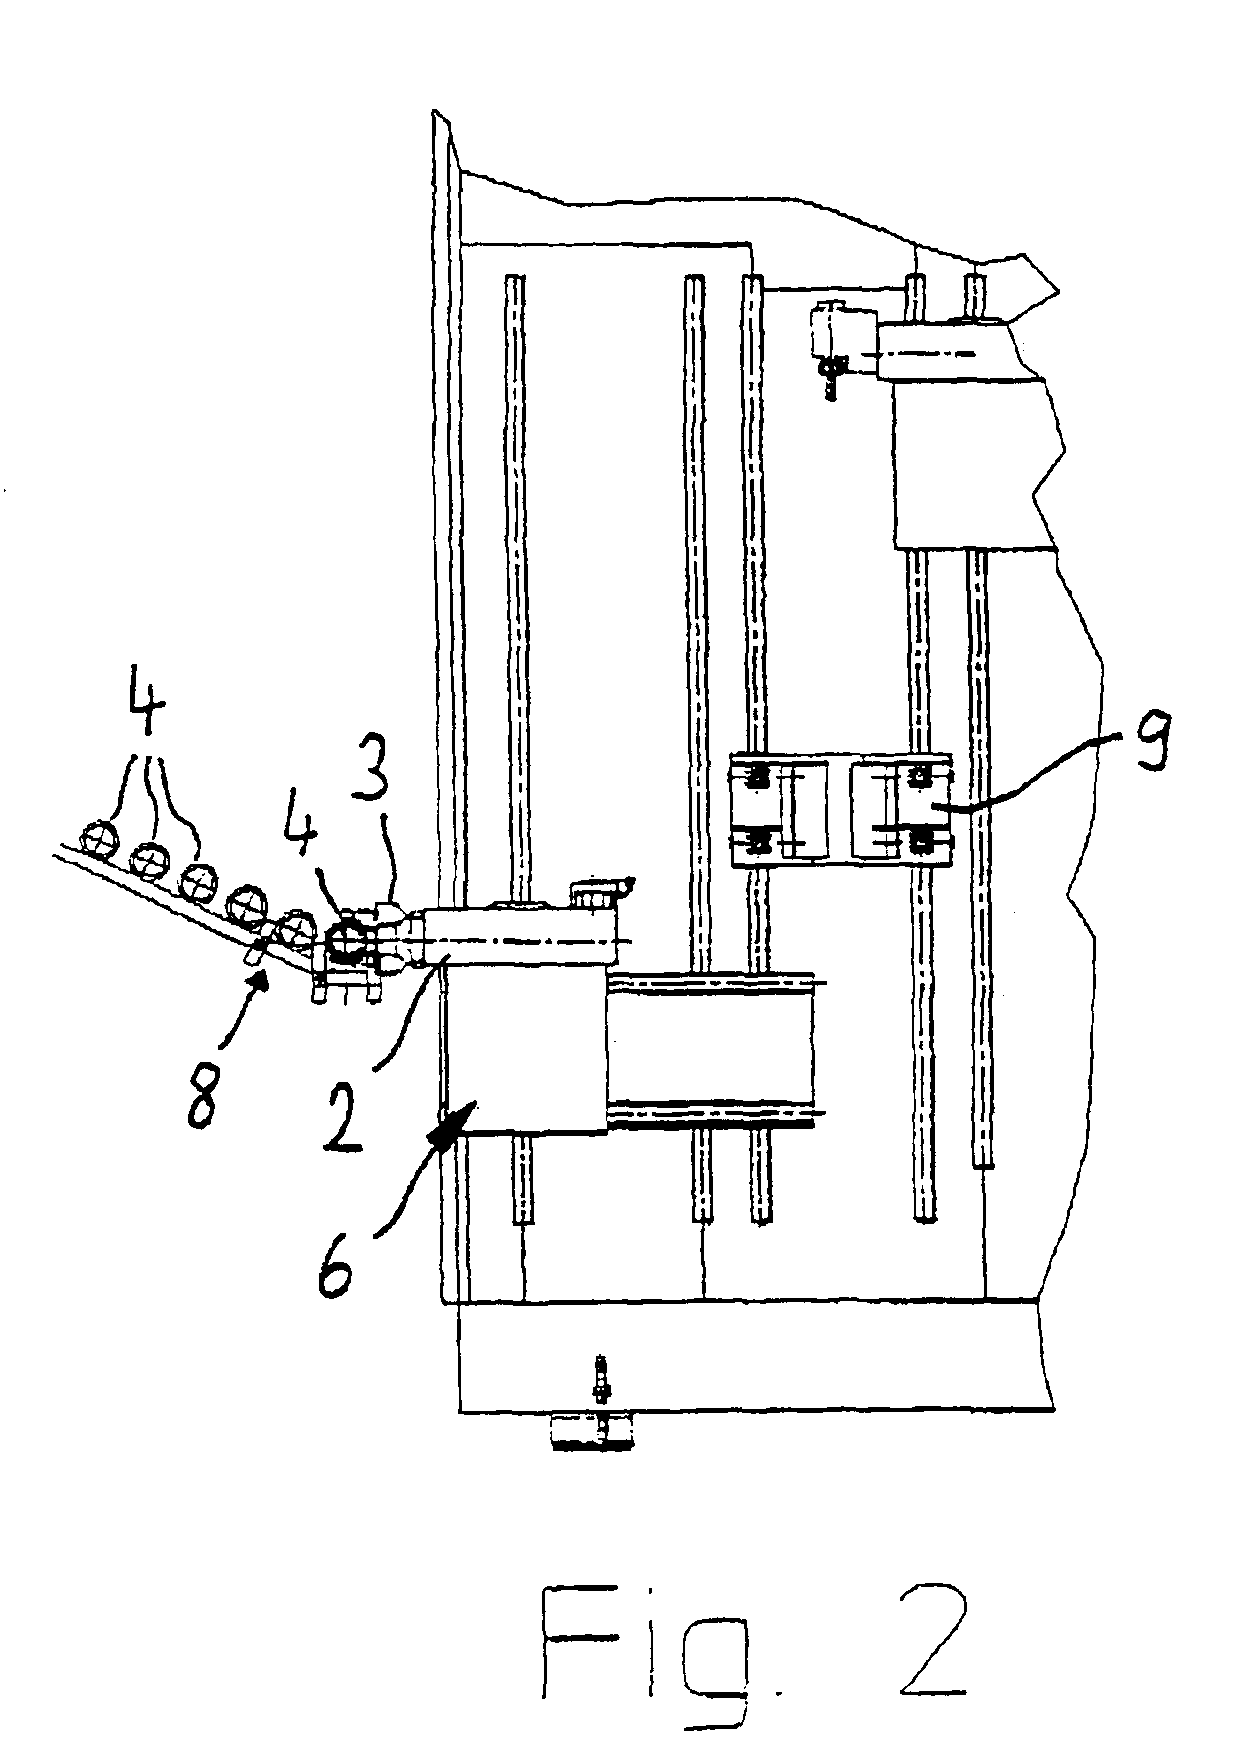 Method and apparatus for machining workpieces